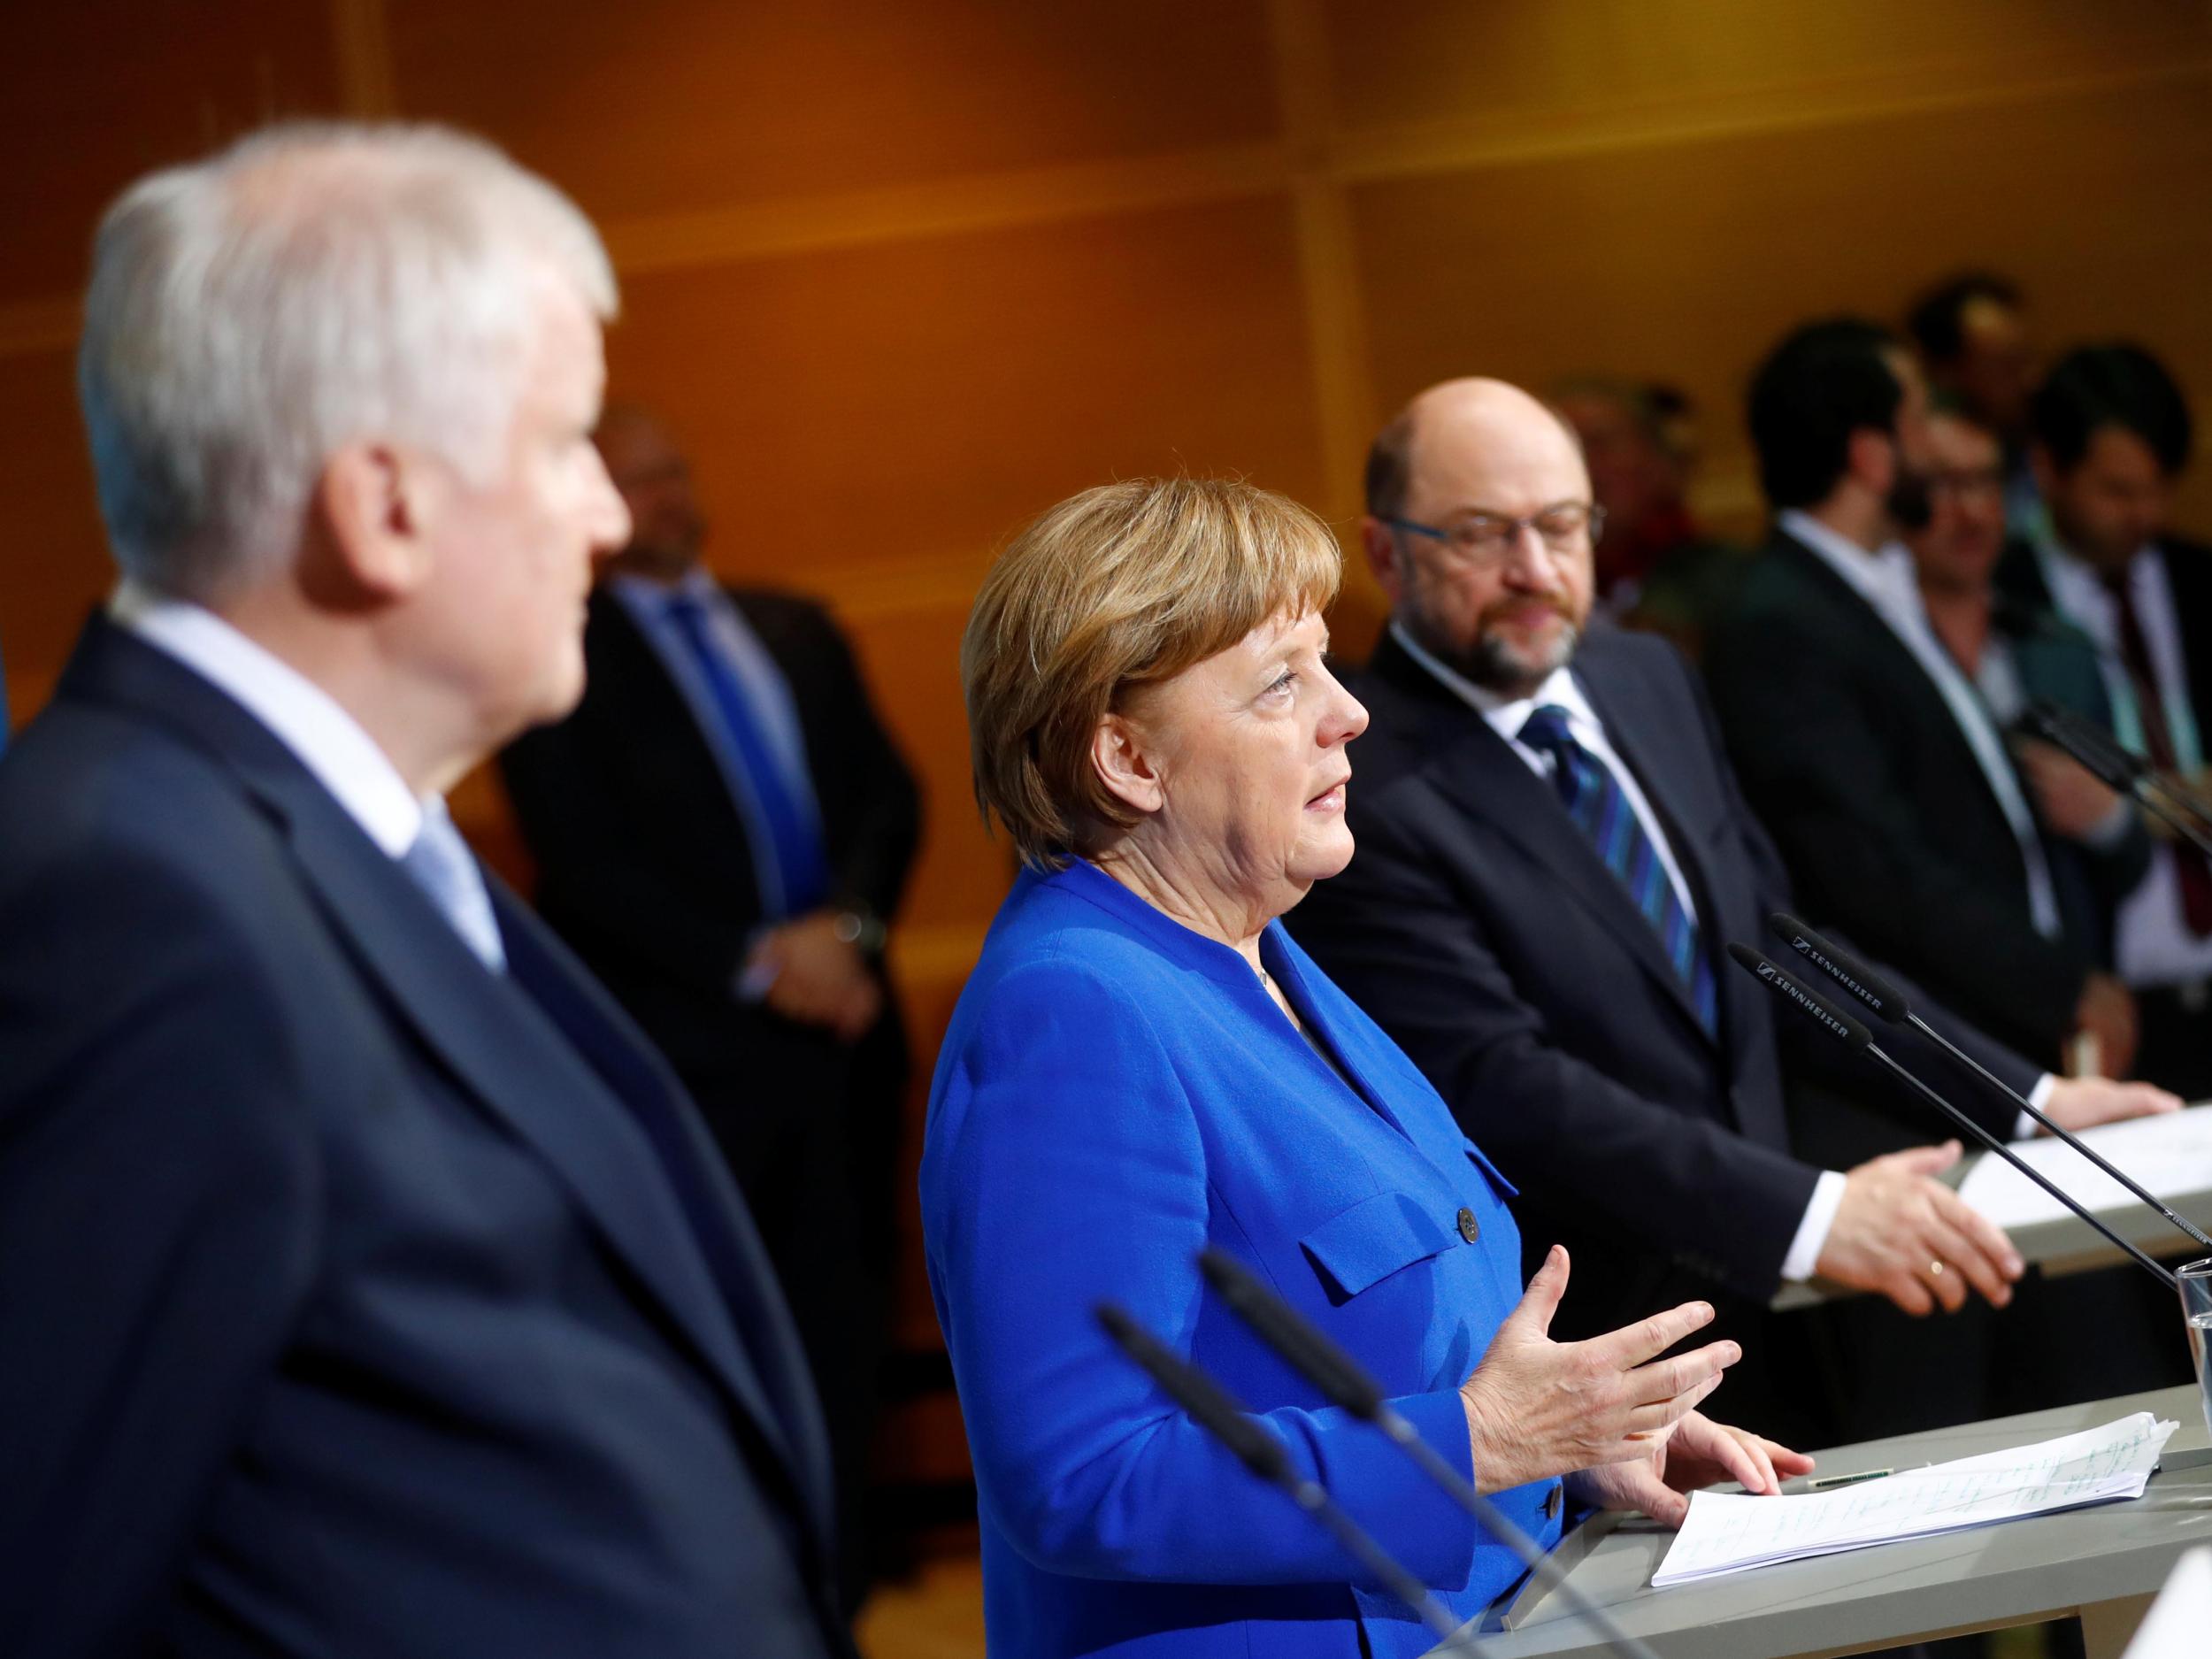 Acting German Chancellor Angela Merkel, leader of the Christian Social Union in Bavaria Horst Seehofer and Social Democratic Party leader Martin Schulz attend a news conference after exploratory talks about forming a new coalition government at the SPD headquarters in Berlin